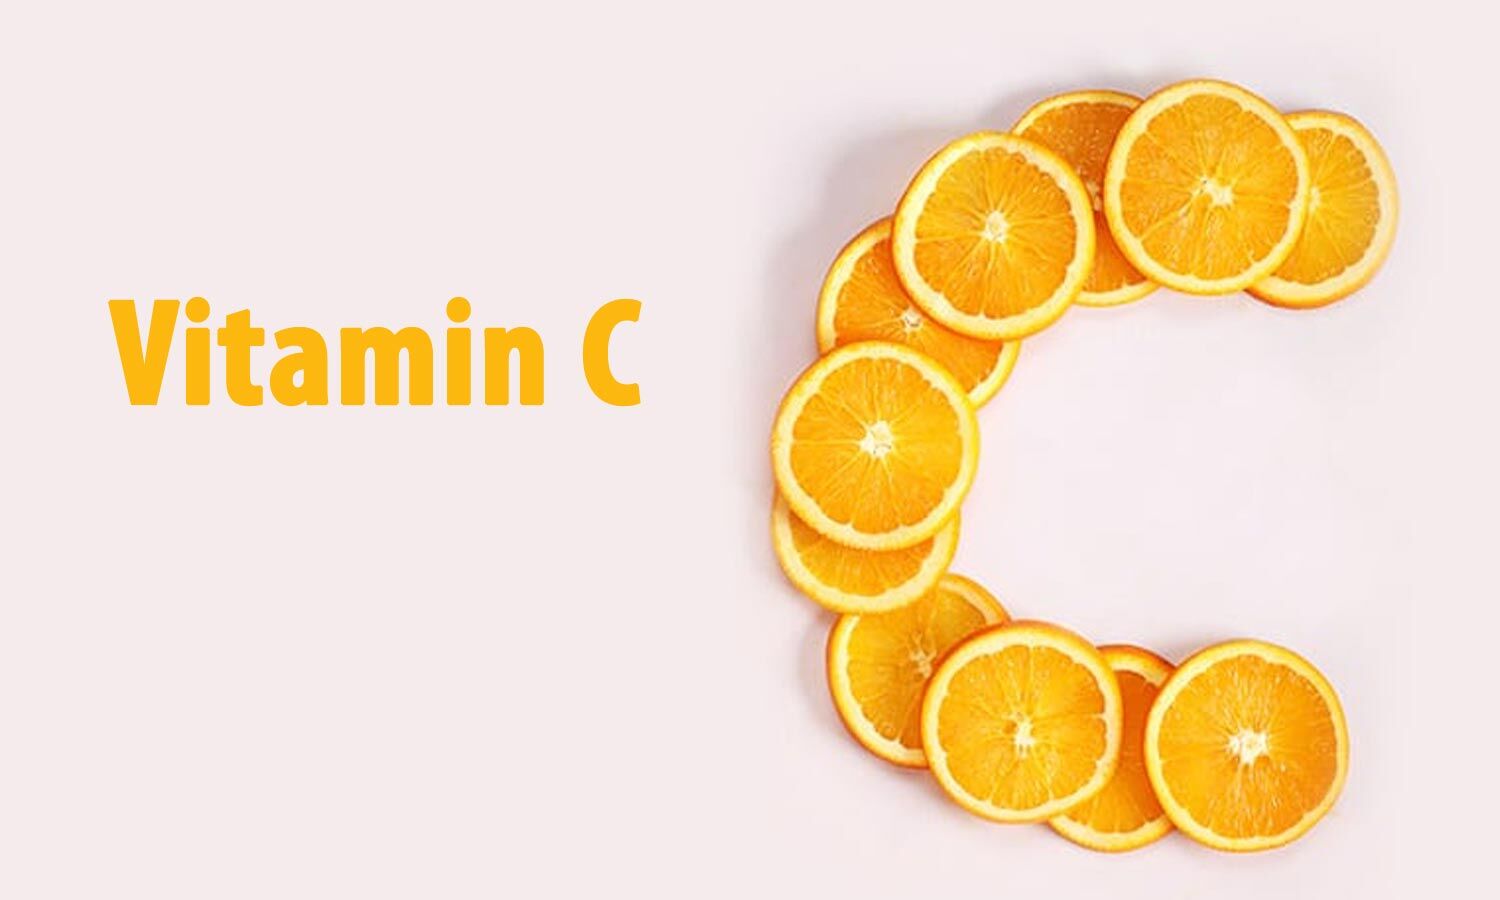 Whole fruit Vitamin C intake linked to feelings of vitality, finds study